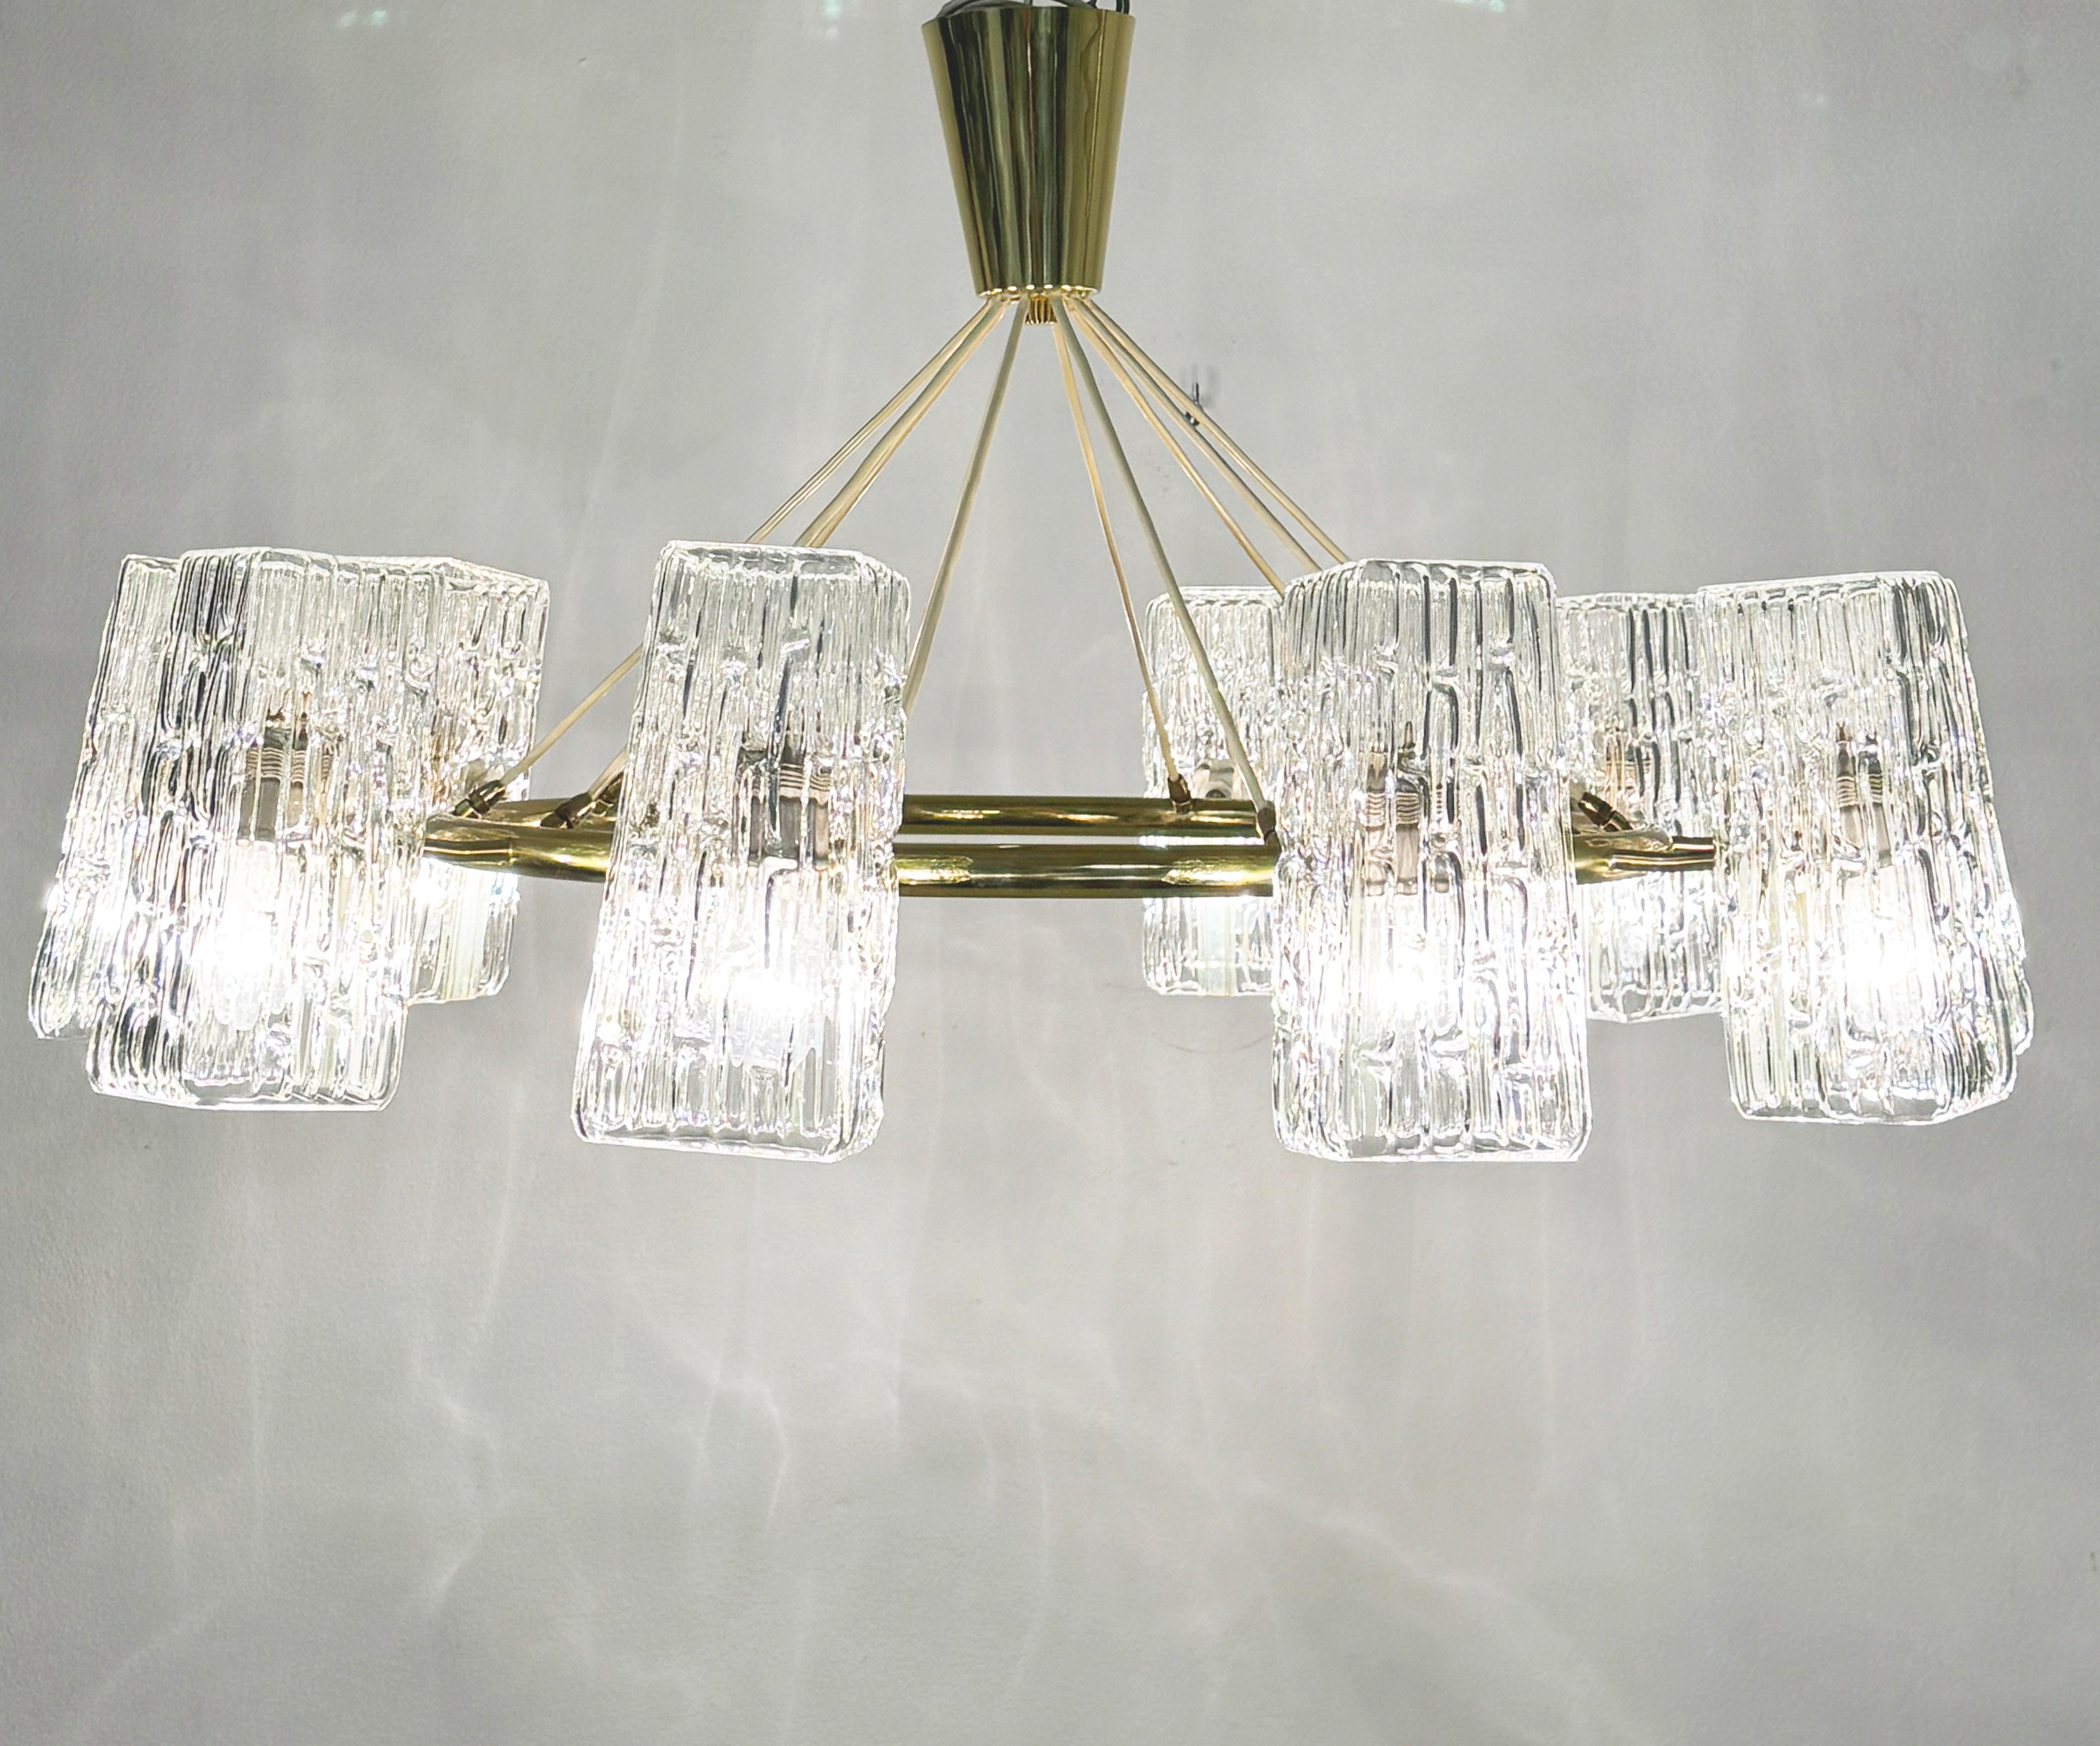 Huge Midcentury Brass Chandelier With Pressed Glass Shades By Rupert Nikoll For Sale 3